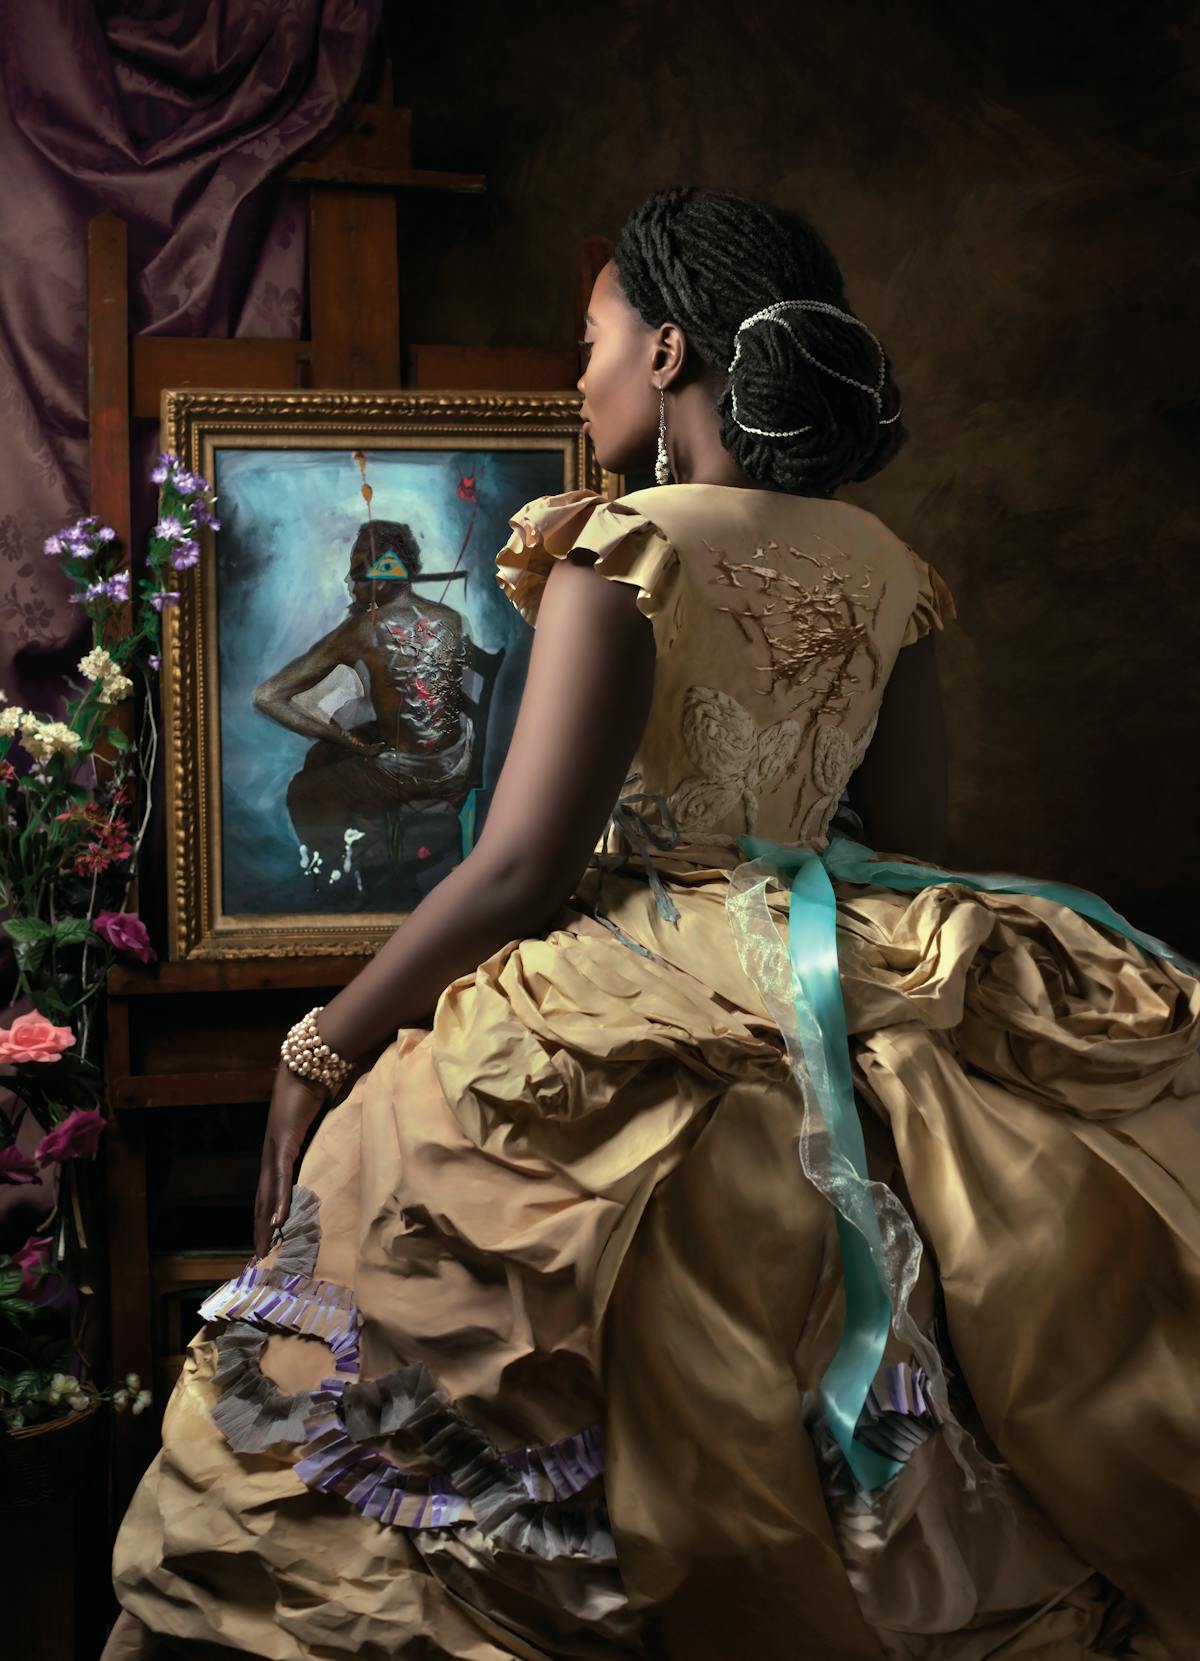 model wearing an ornte gold paper dress standing before a surrealist painting depicting a man seated on a chair